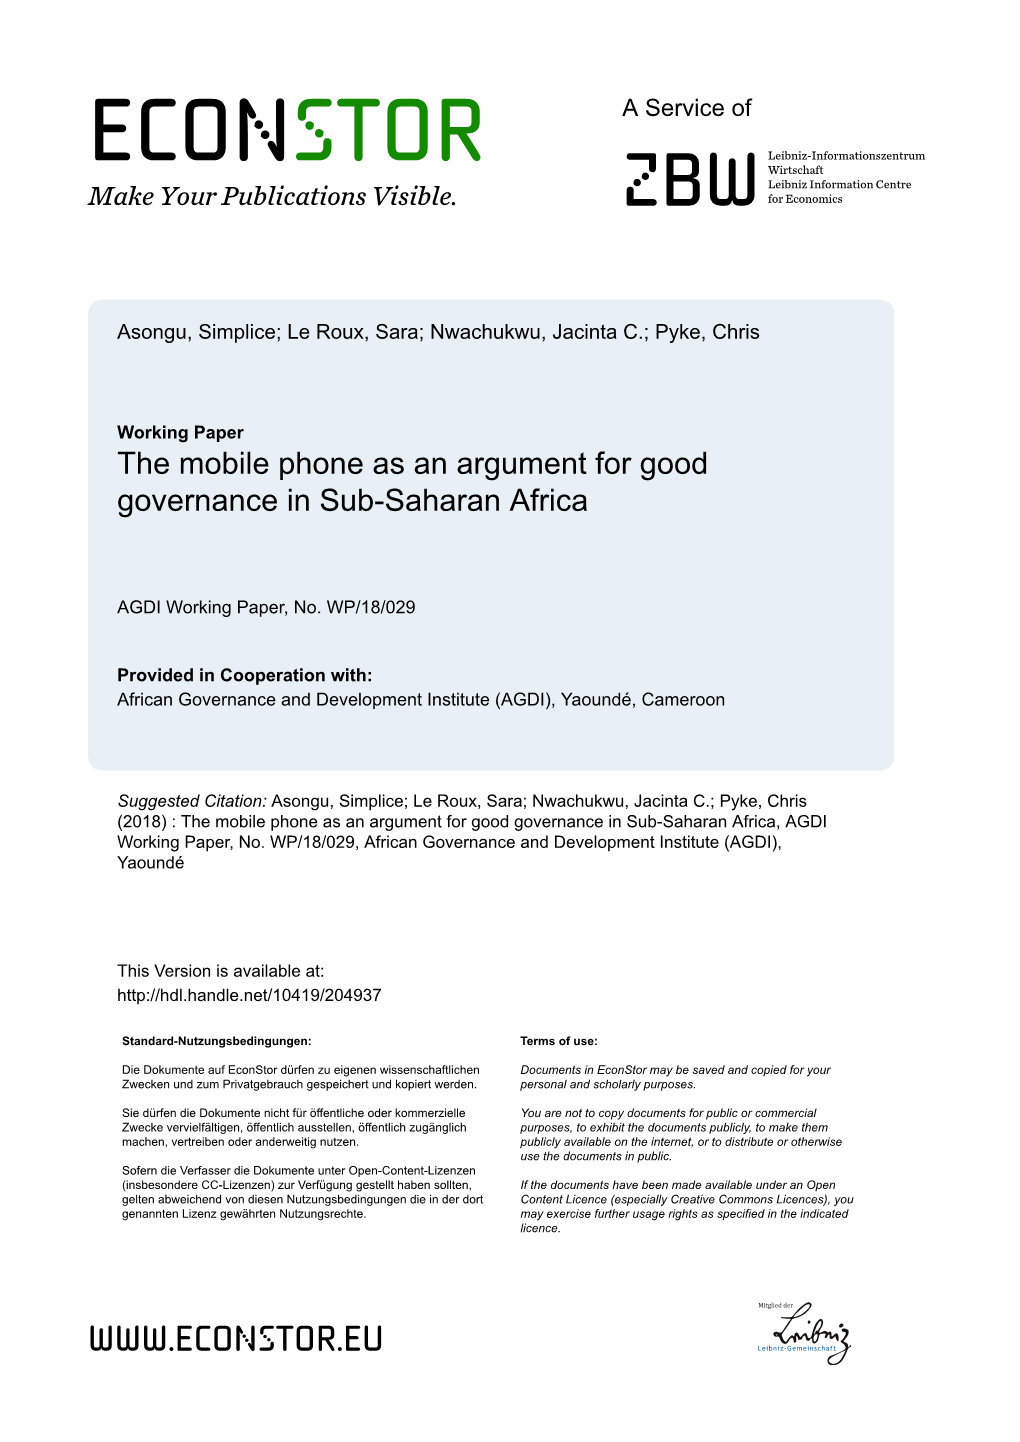 The Mobile Phone As an Argument for Good Governance in Sub-Saharan Africa